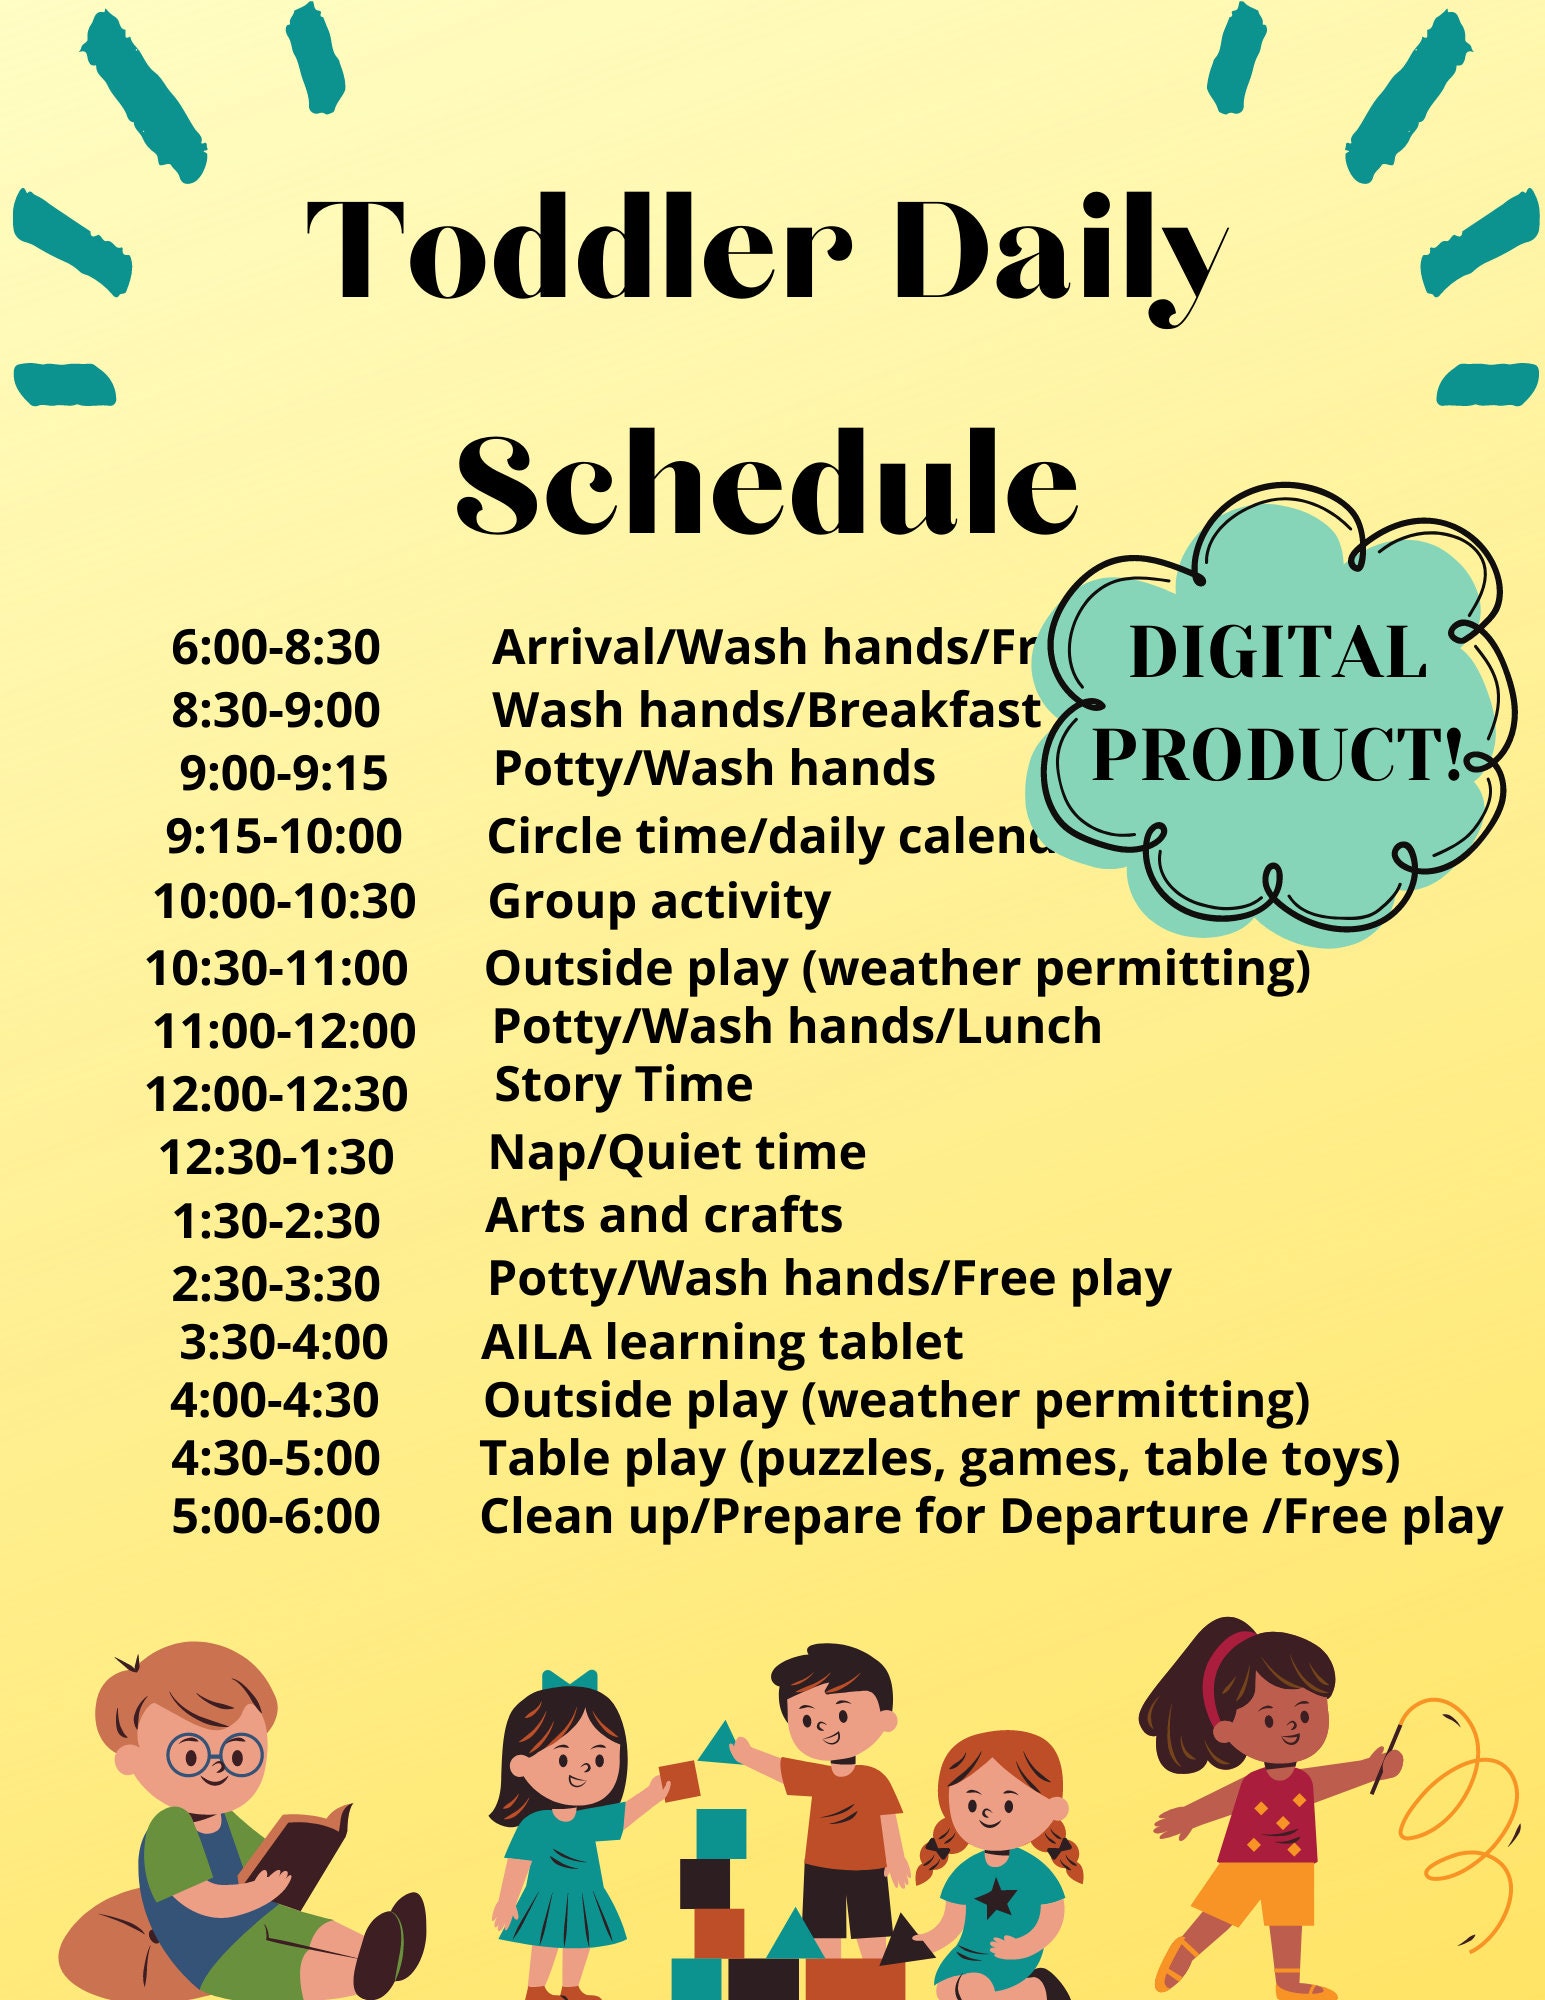 editable-daycare-daily-toddler-schedule-instant-etsy